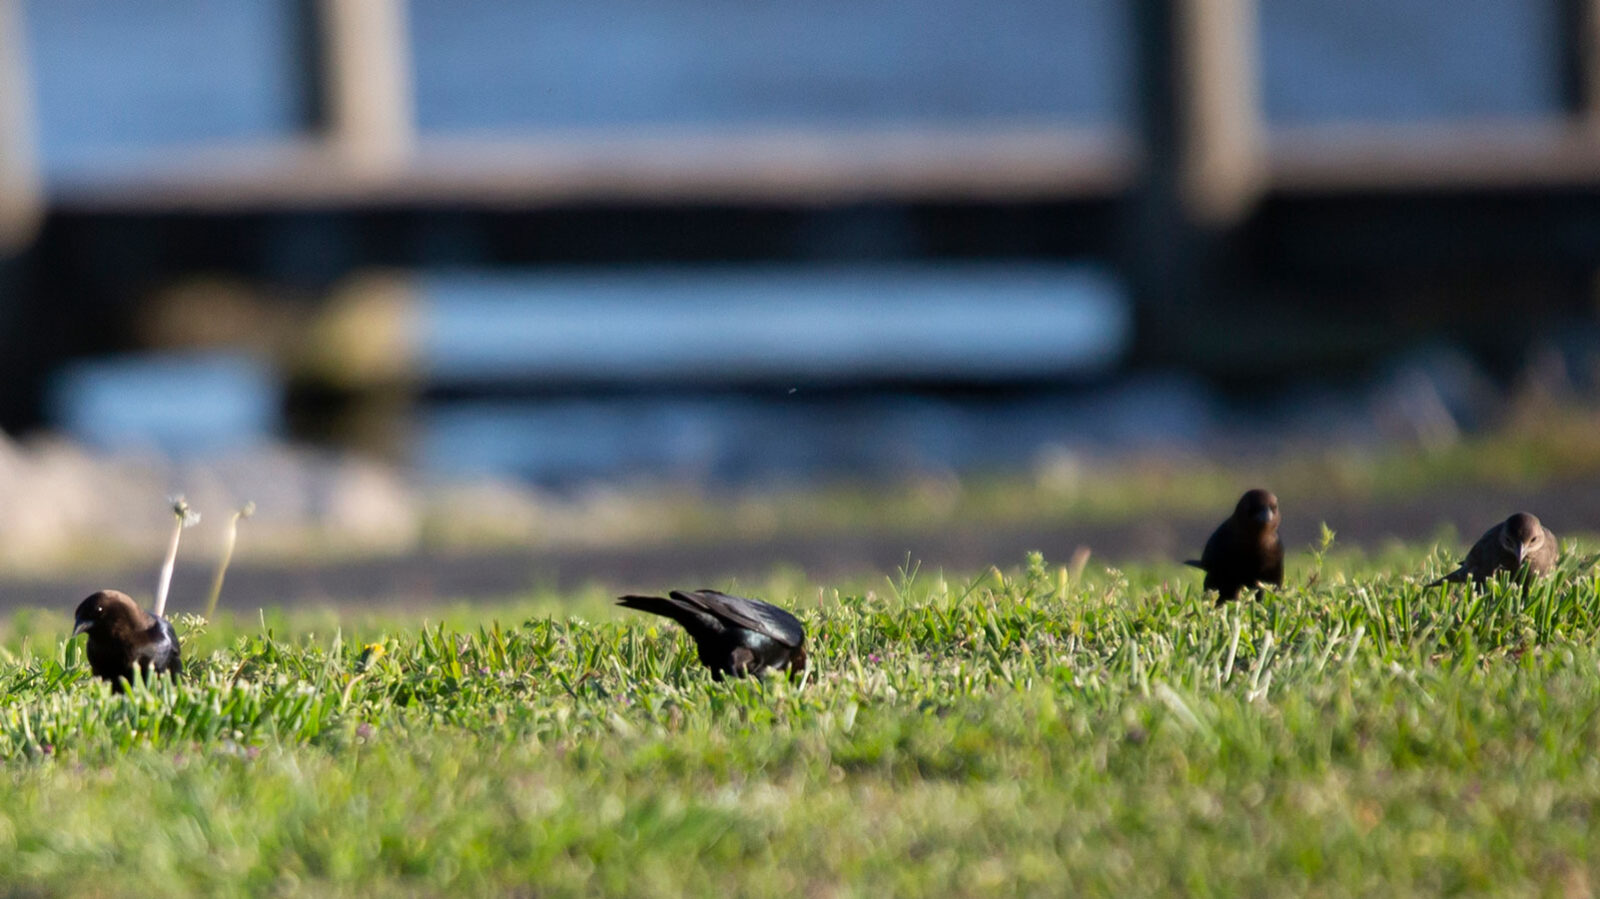 Flock of brown-headed cowbirds foraging on a lawn